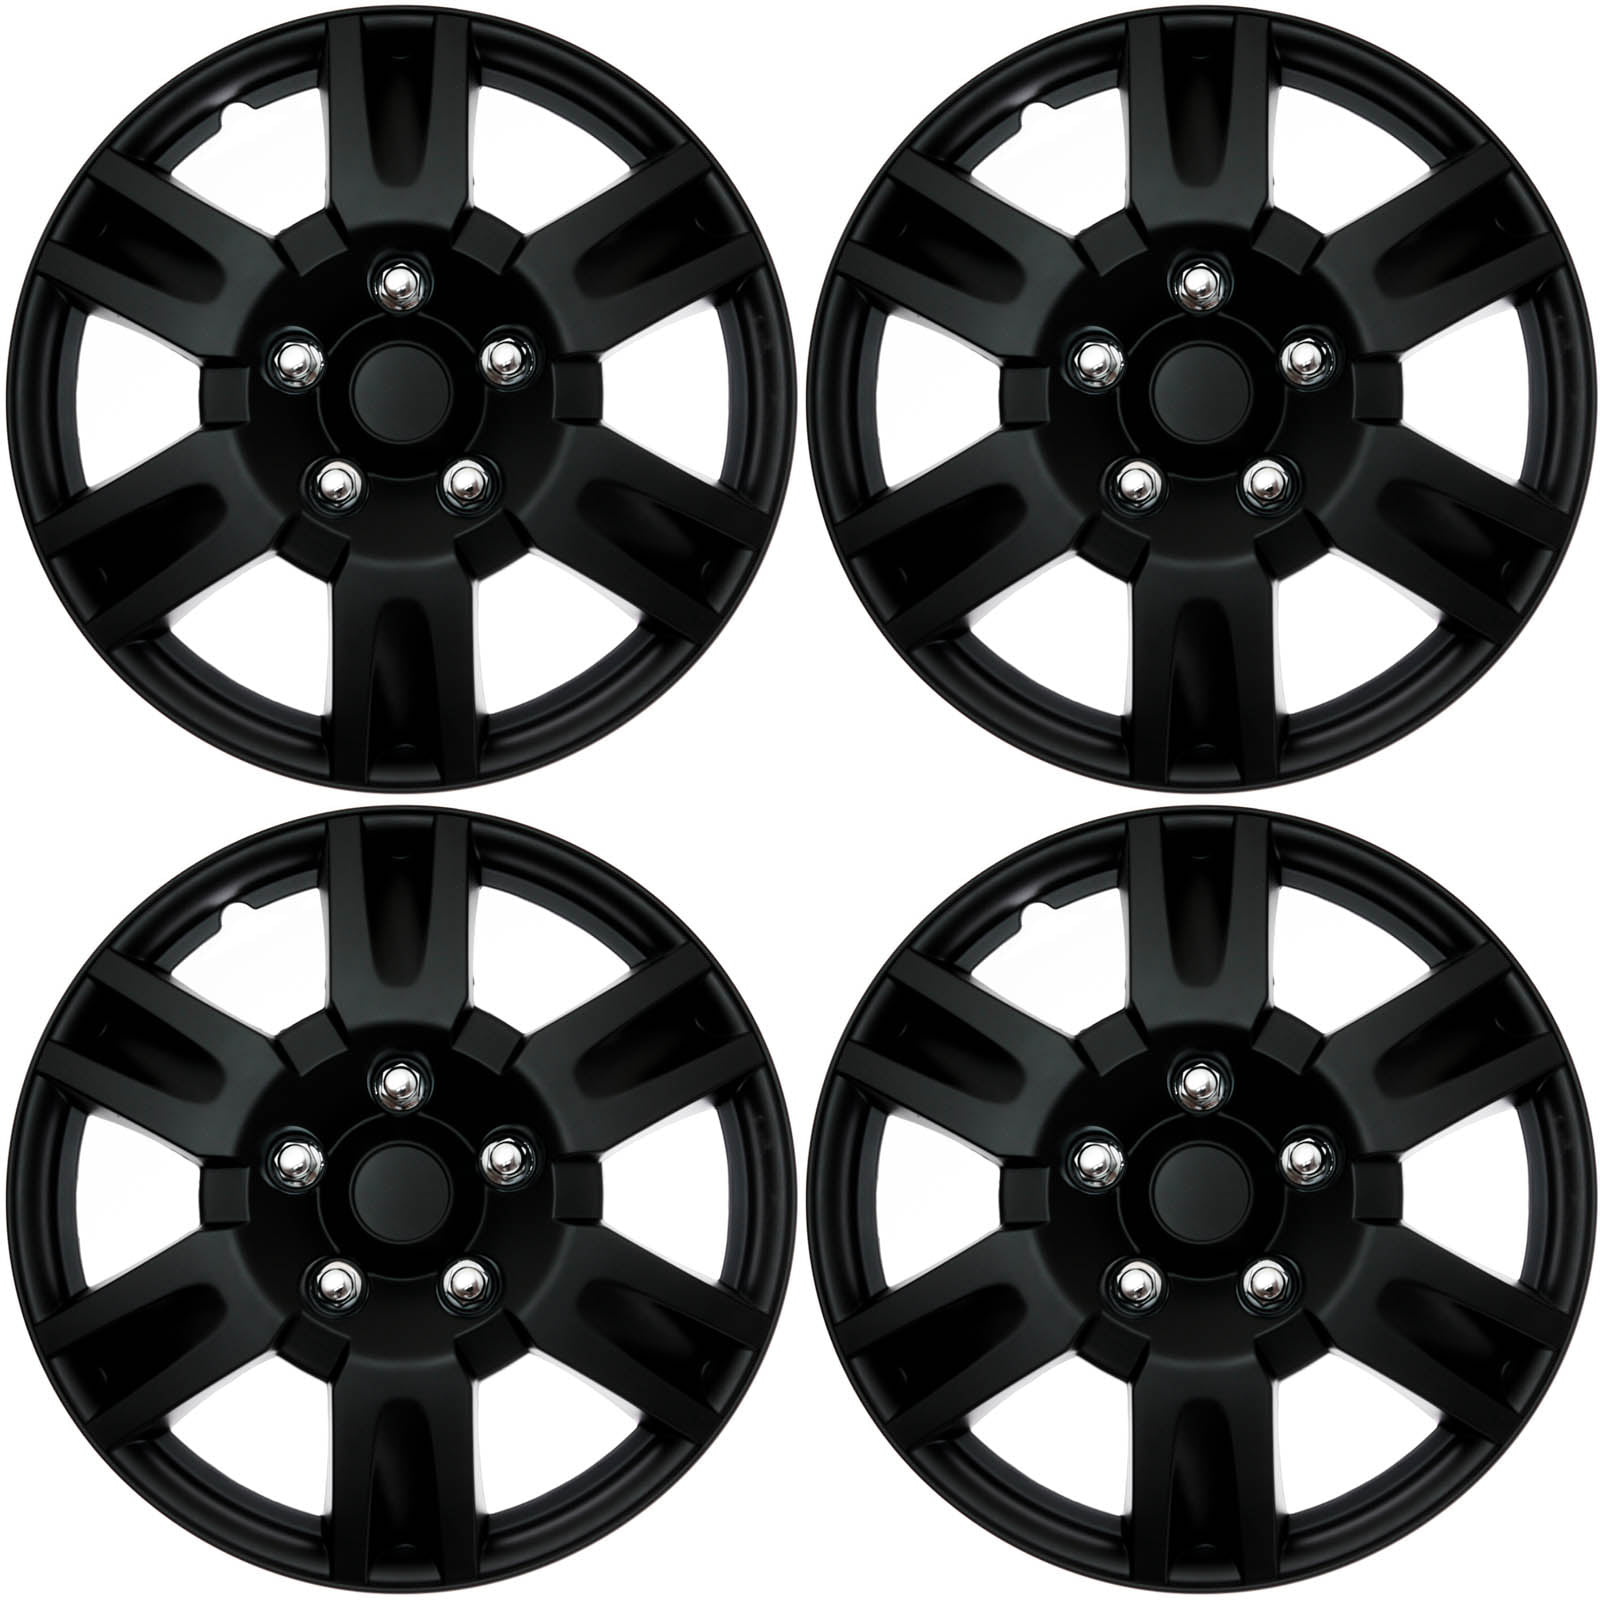 Set of 4 Universal Aftermarket 15 Inch Matte Black Hub Caps Wheel Covers Cover Trend 